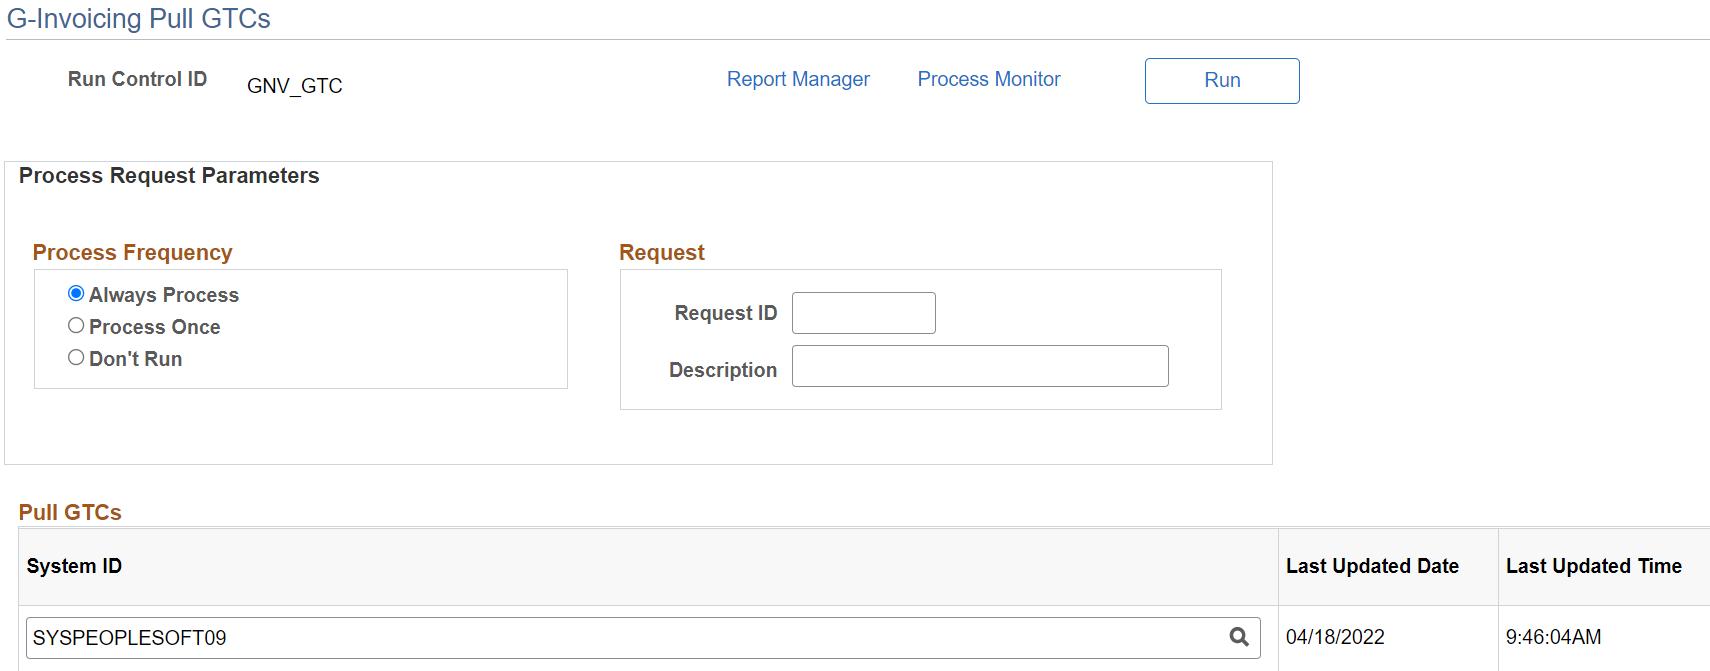 G-Invoicing Pull GTCs Page